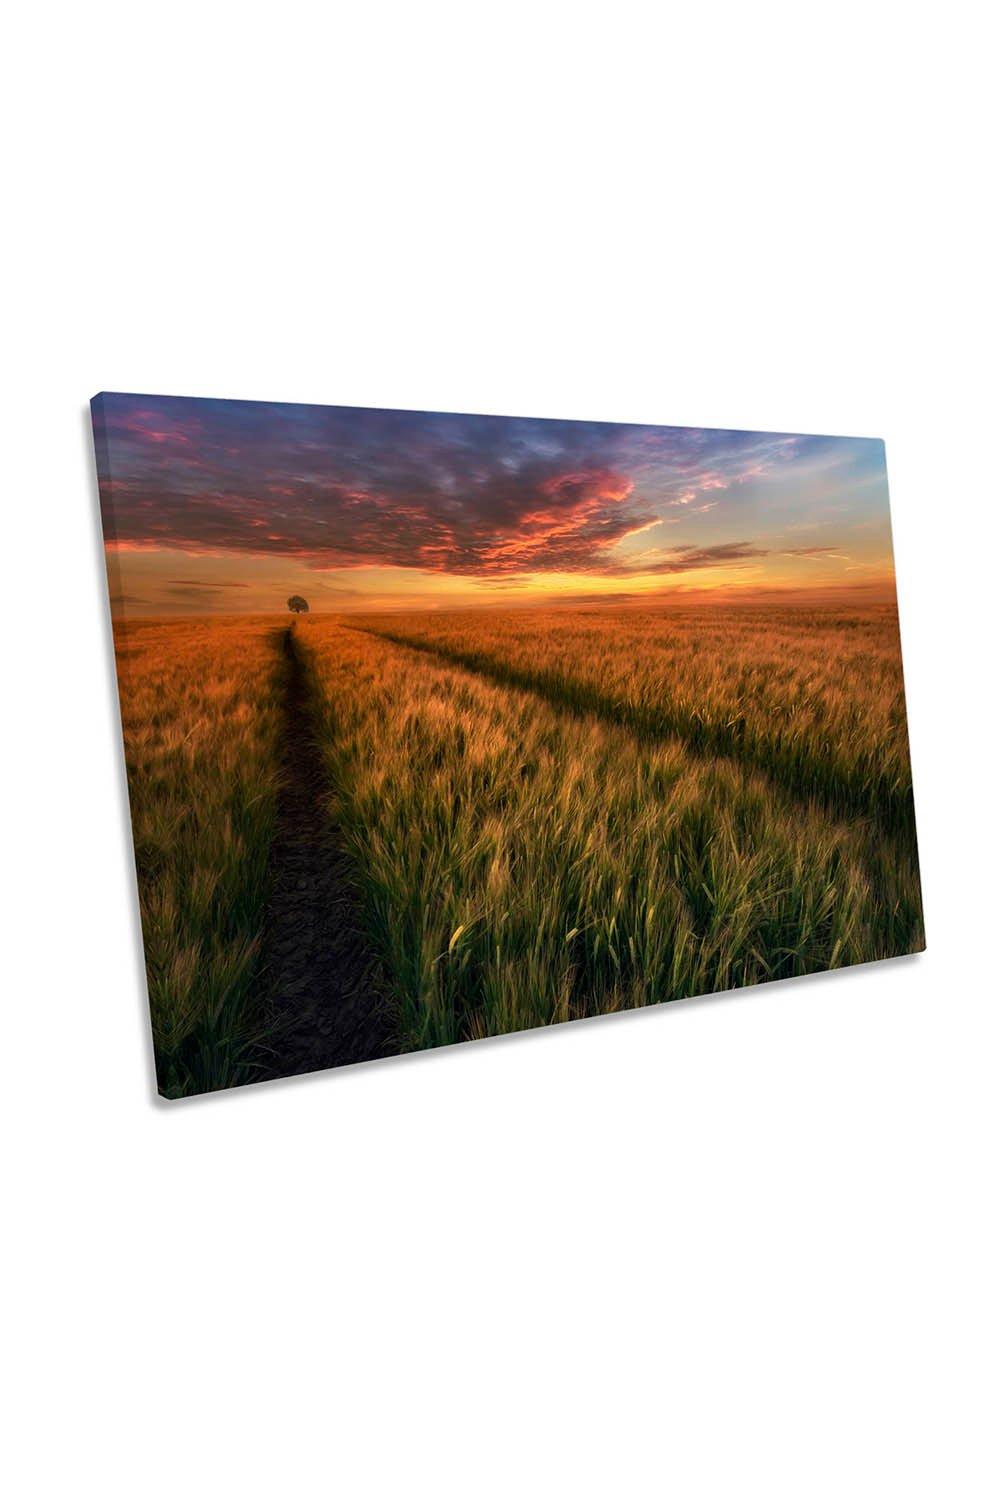 Somewhere at Sunset Countryside Canvas Wall Art Picture Print